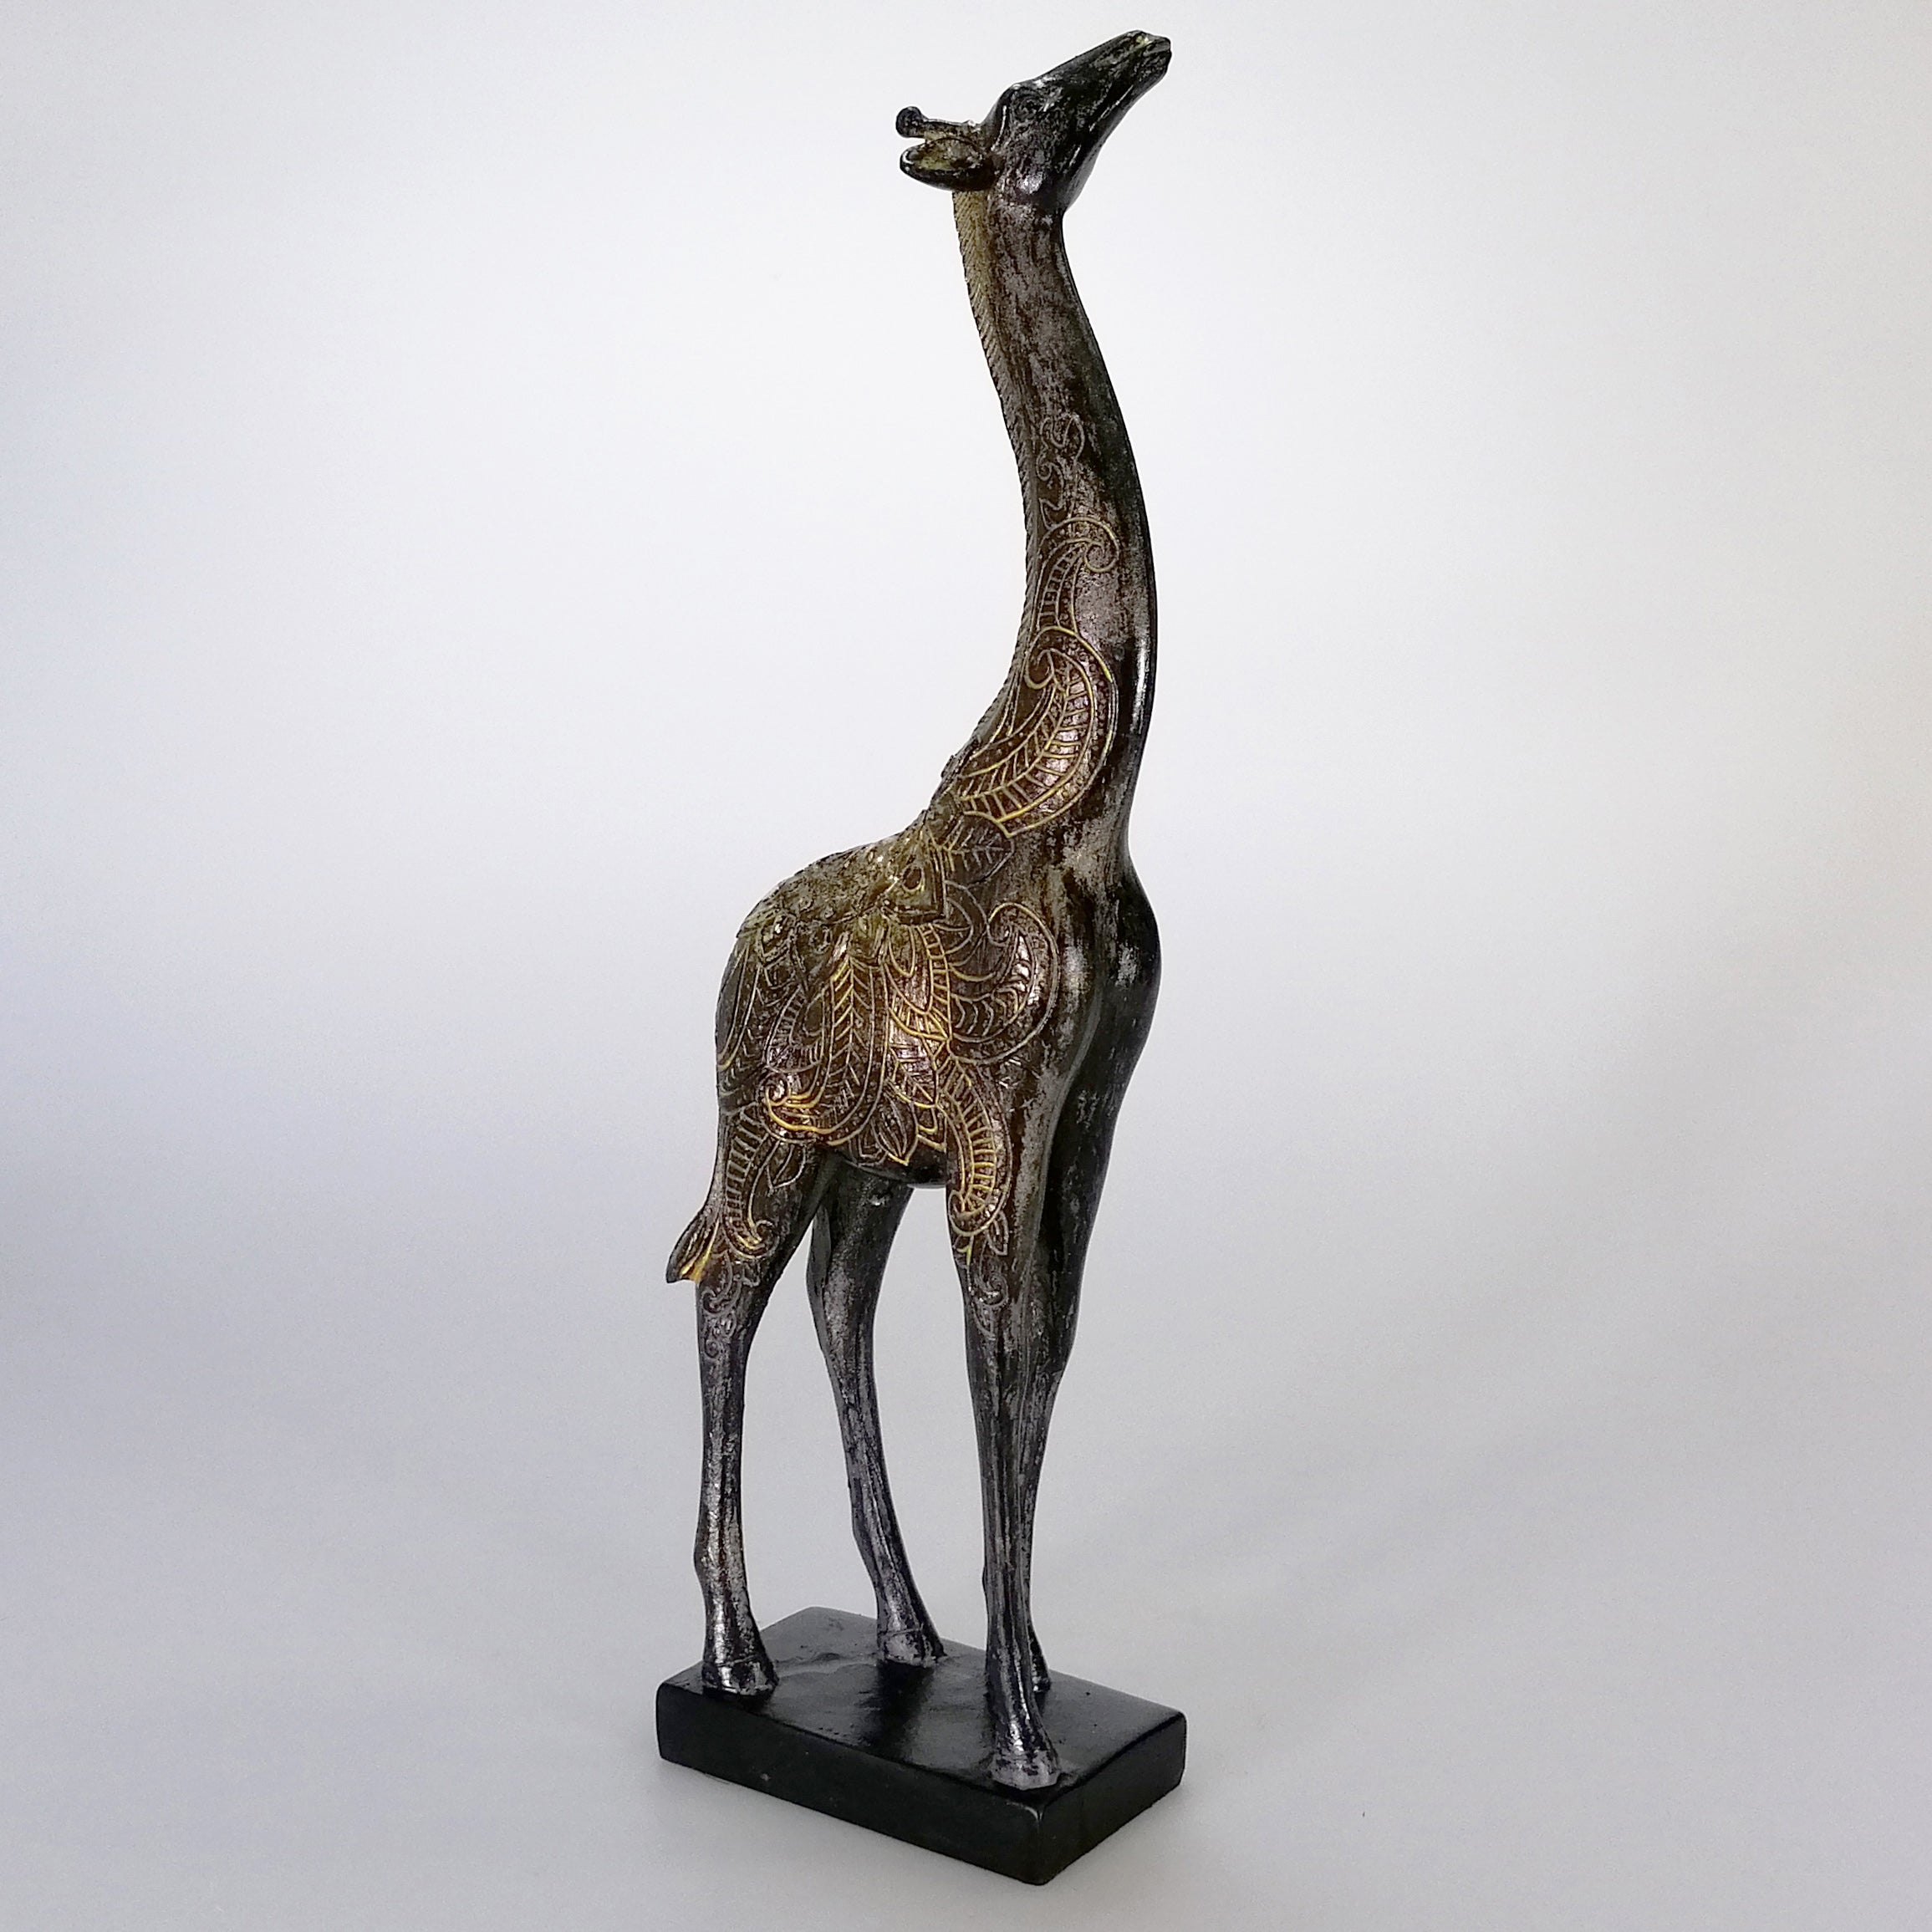 Black and Gold Painted Giraffe Figurine - Small